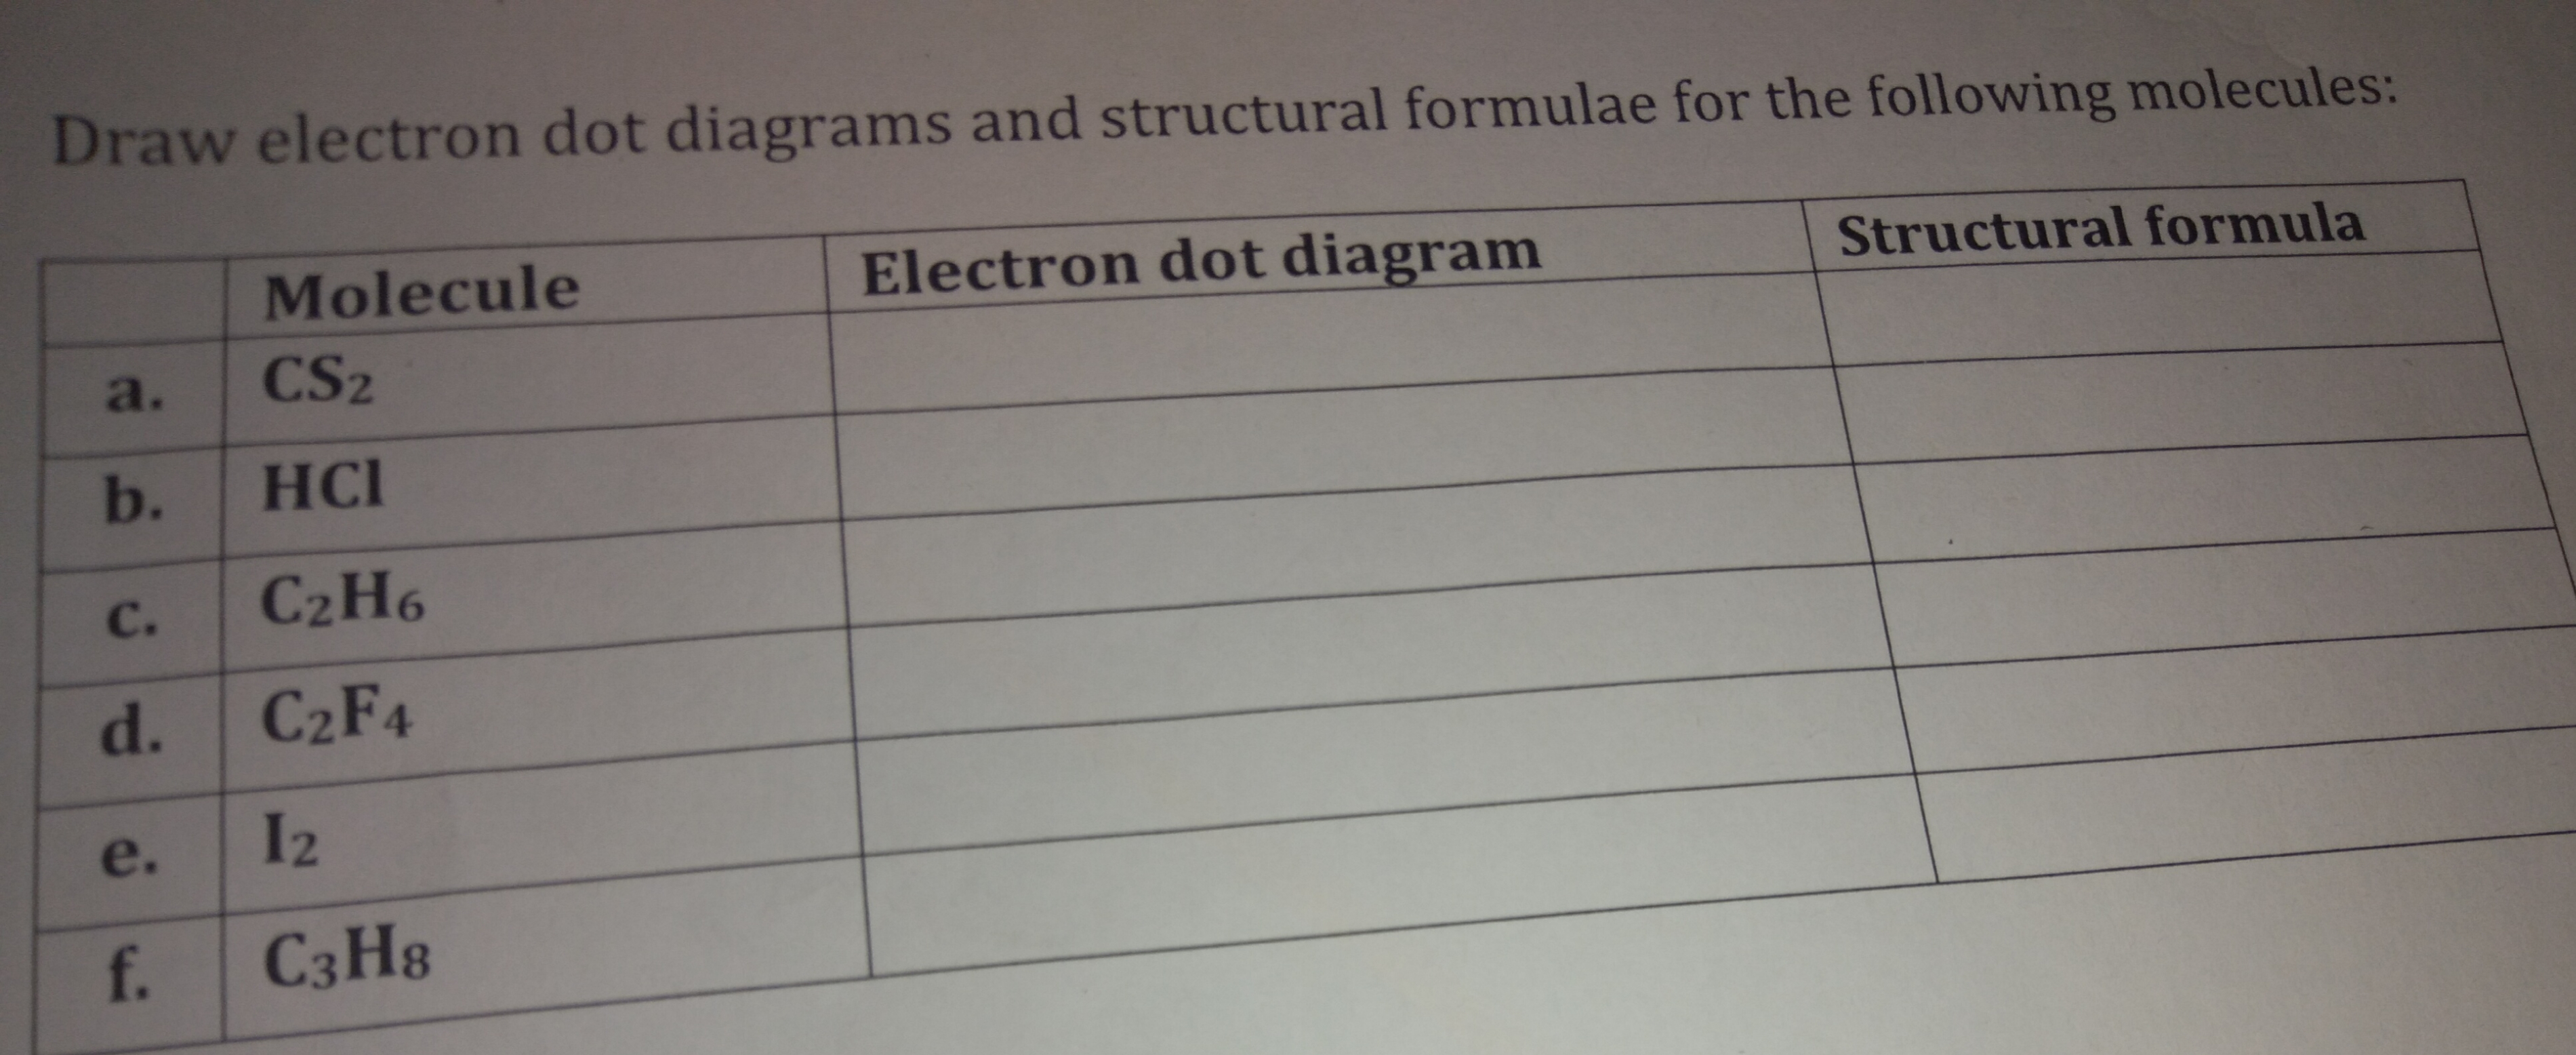 Draw electron dot diagrams and structural formulae for the following molecules:
Molecule
Electron dot diagram
Structural formula
a.
CS2
b.
HCI
с.
C2H6
